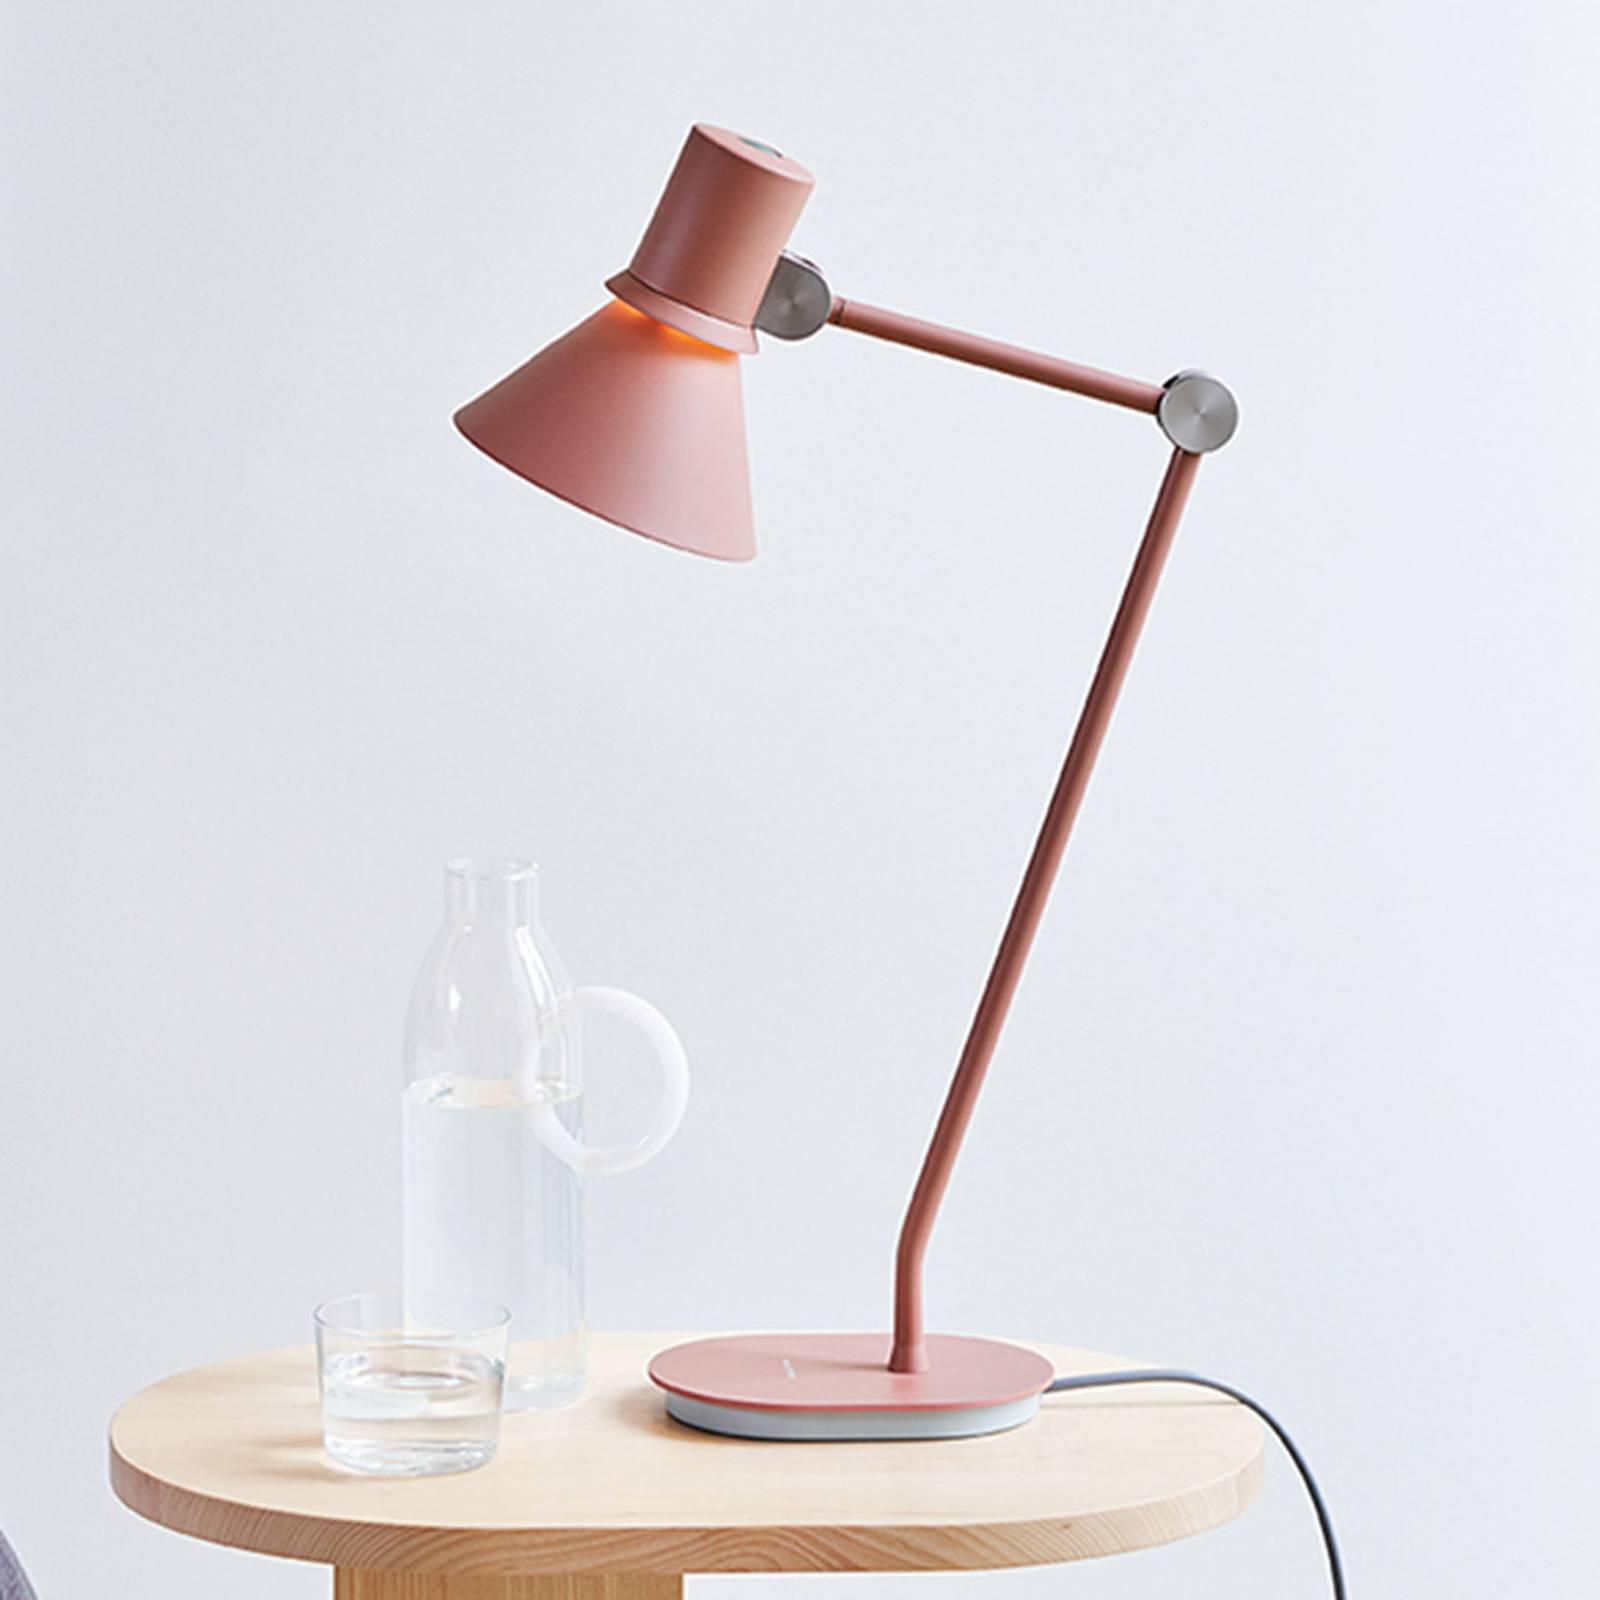 Anglepoise Type 80 Tischlampe, rosé von Anglepoise